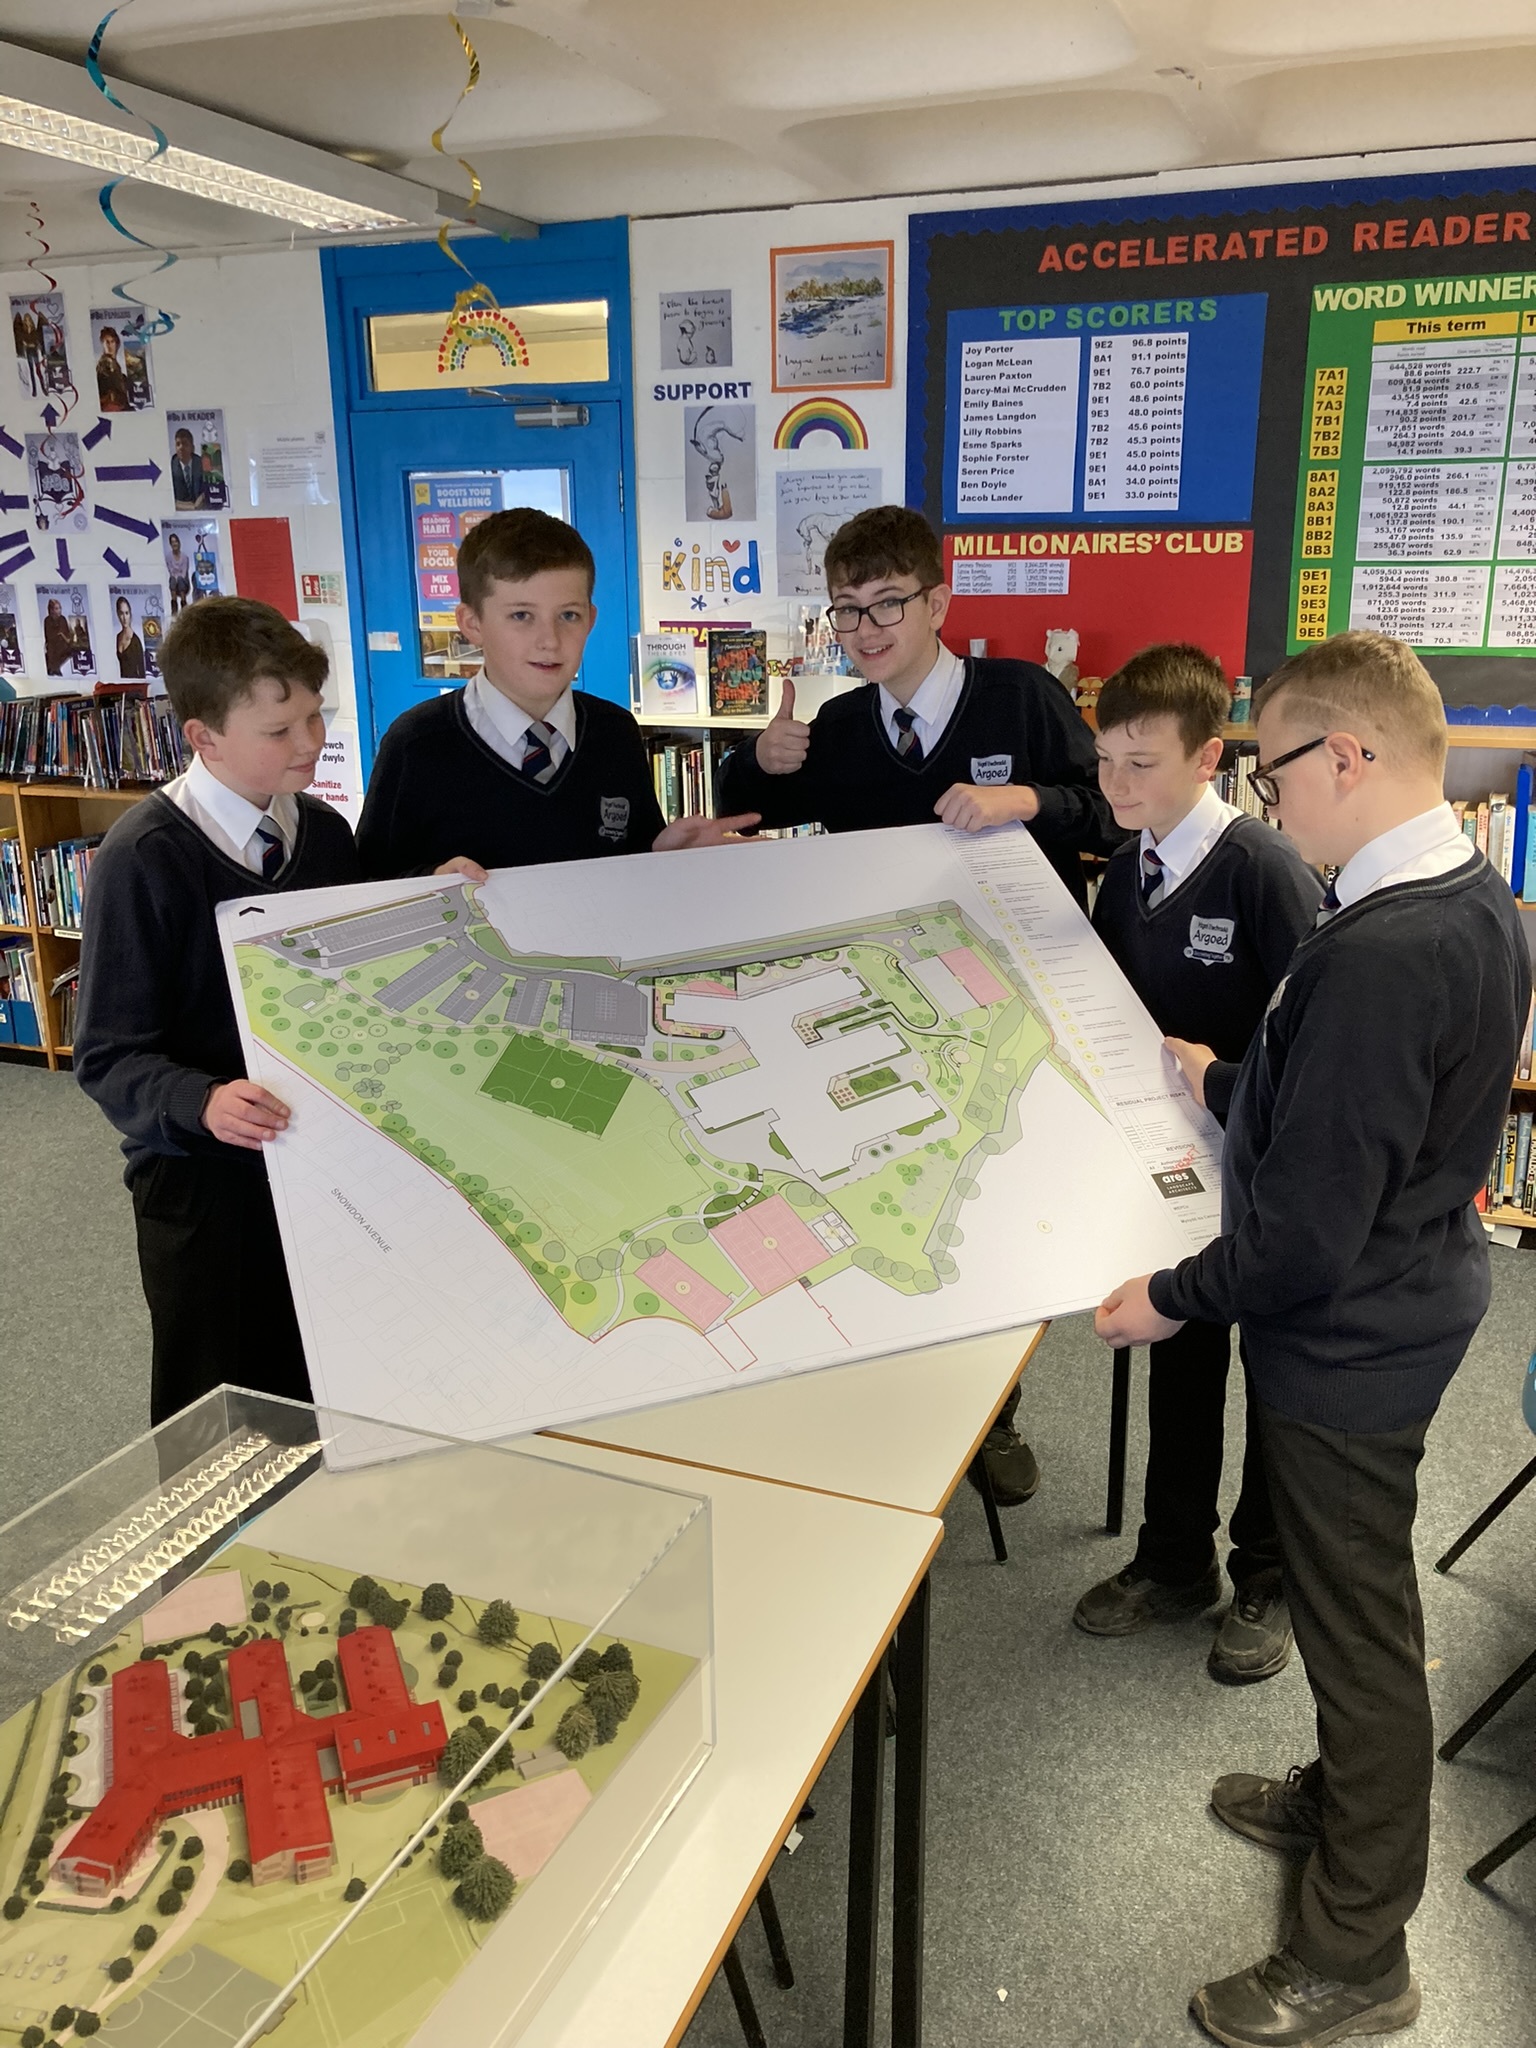 Argoed High School students look over the site plans.